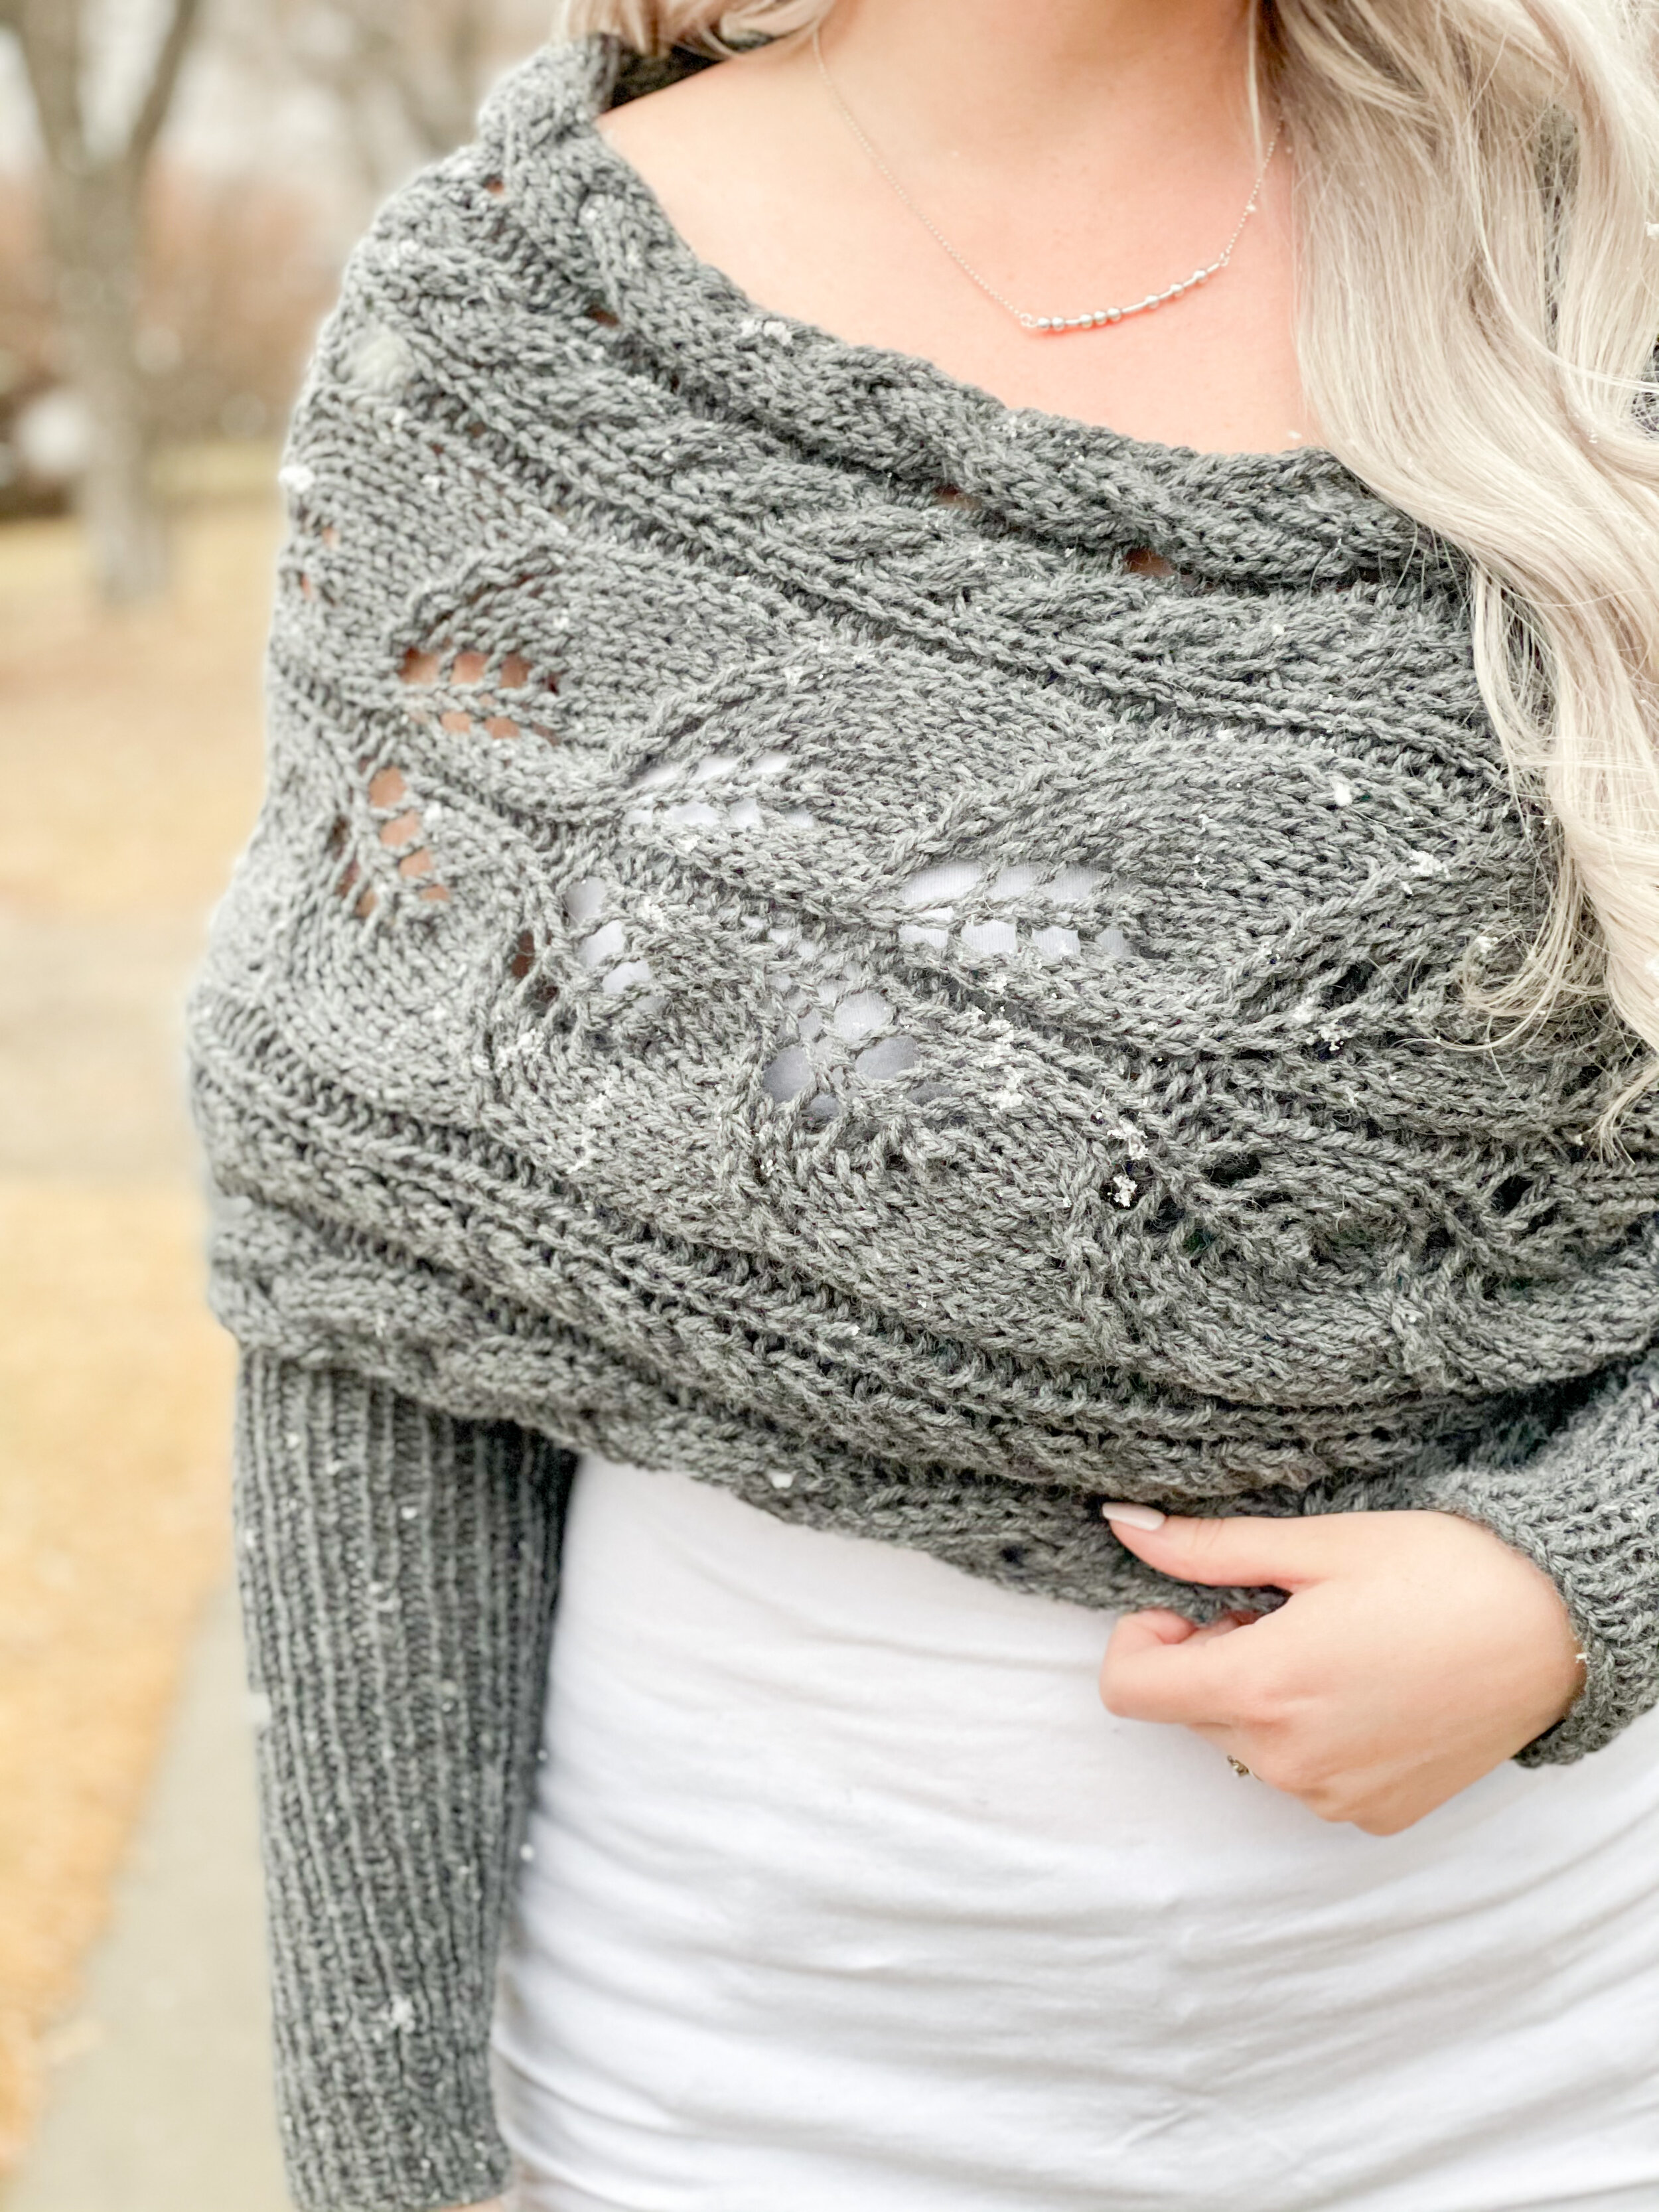 Woman's Knitted Wrap in White & Black Handmade in the USA Lightweight Shoulder or Neck Wrap Ready to Ship Hand Knit Shawl